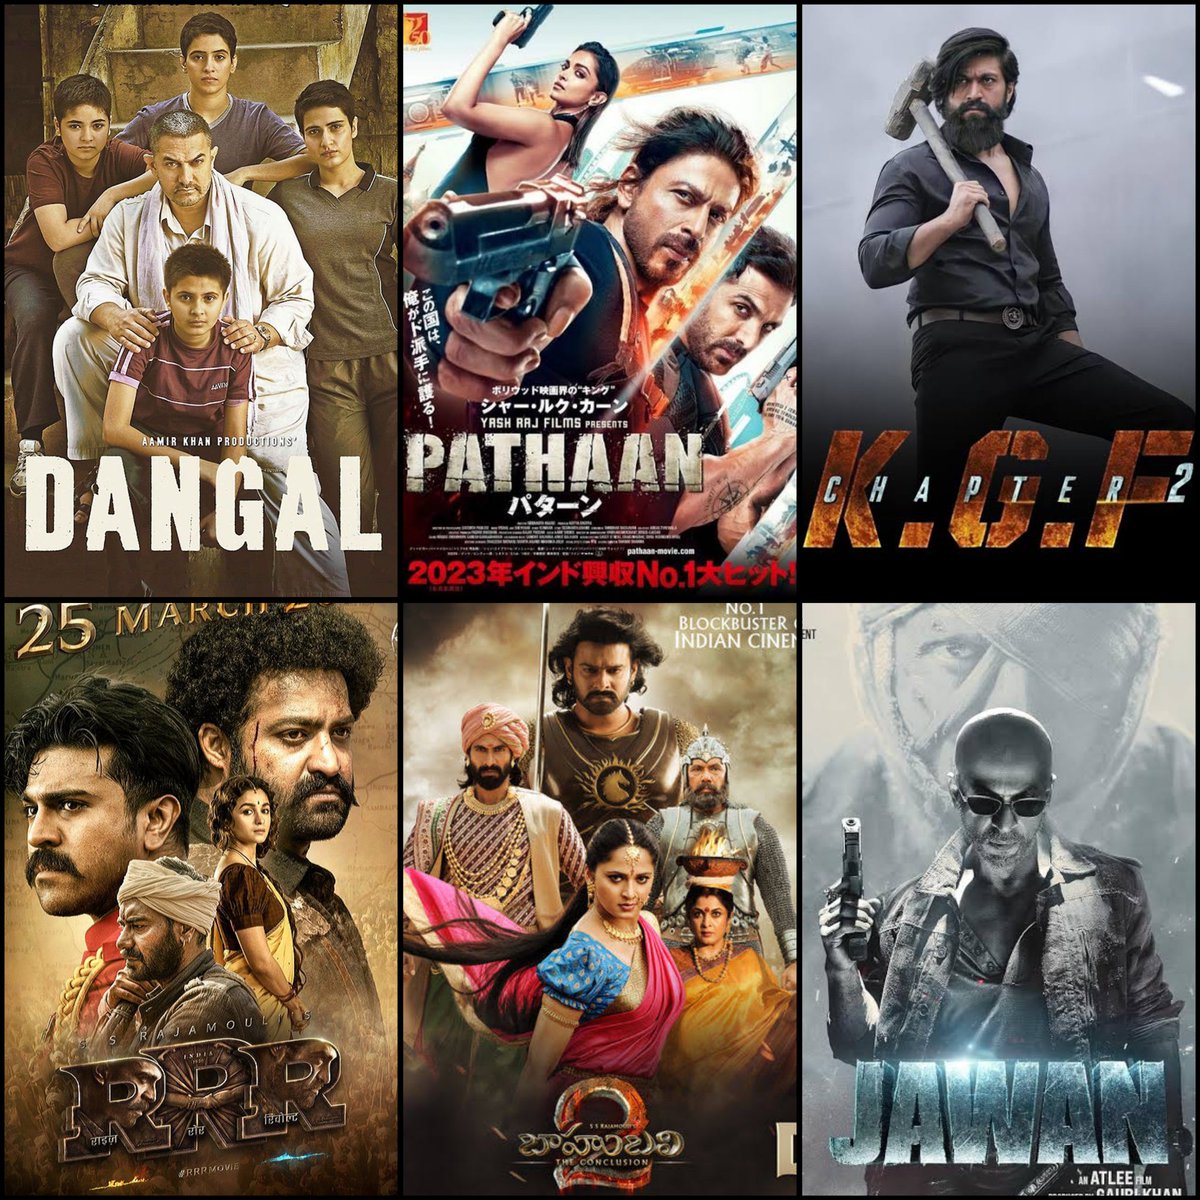 ₹1000cr Indian movies

Tollywood - 2
Bollywood - 3
Sandalwood - 1

Which is your favorite movie in these 6❓

#Dangal #Pathaan #KGF2 #RRR #Jawan